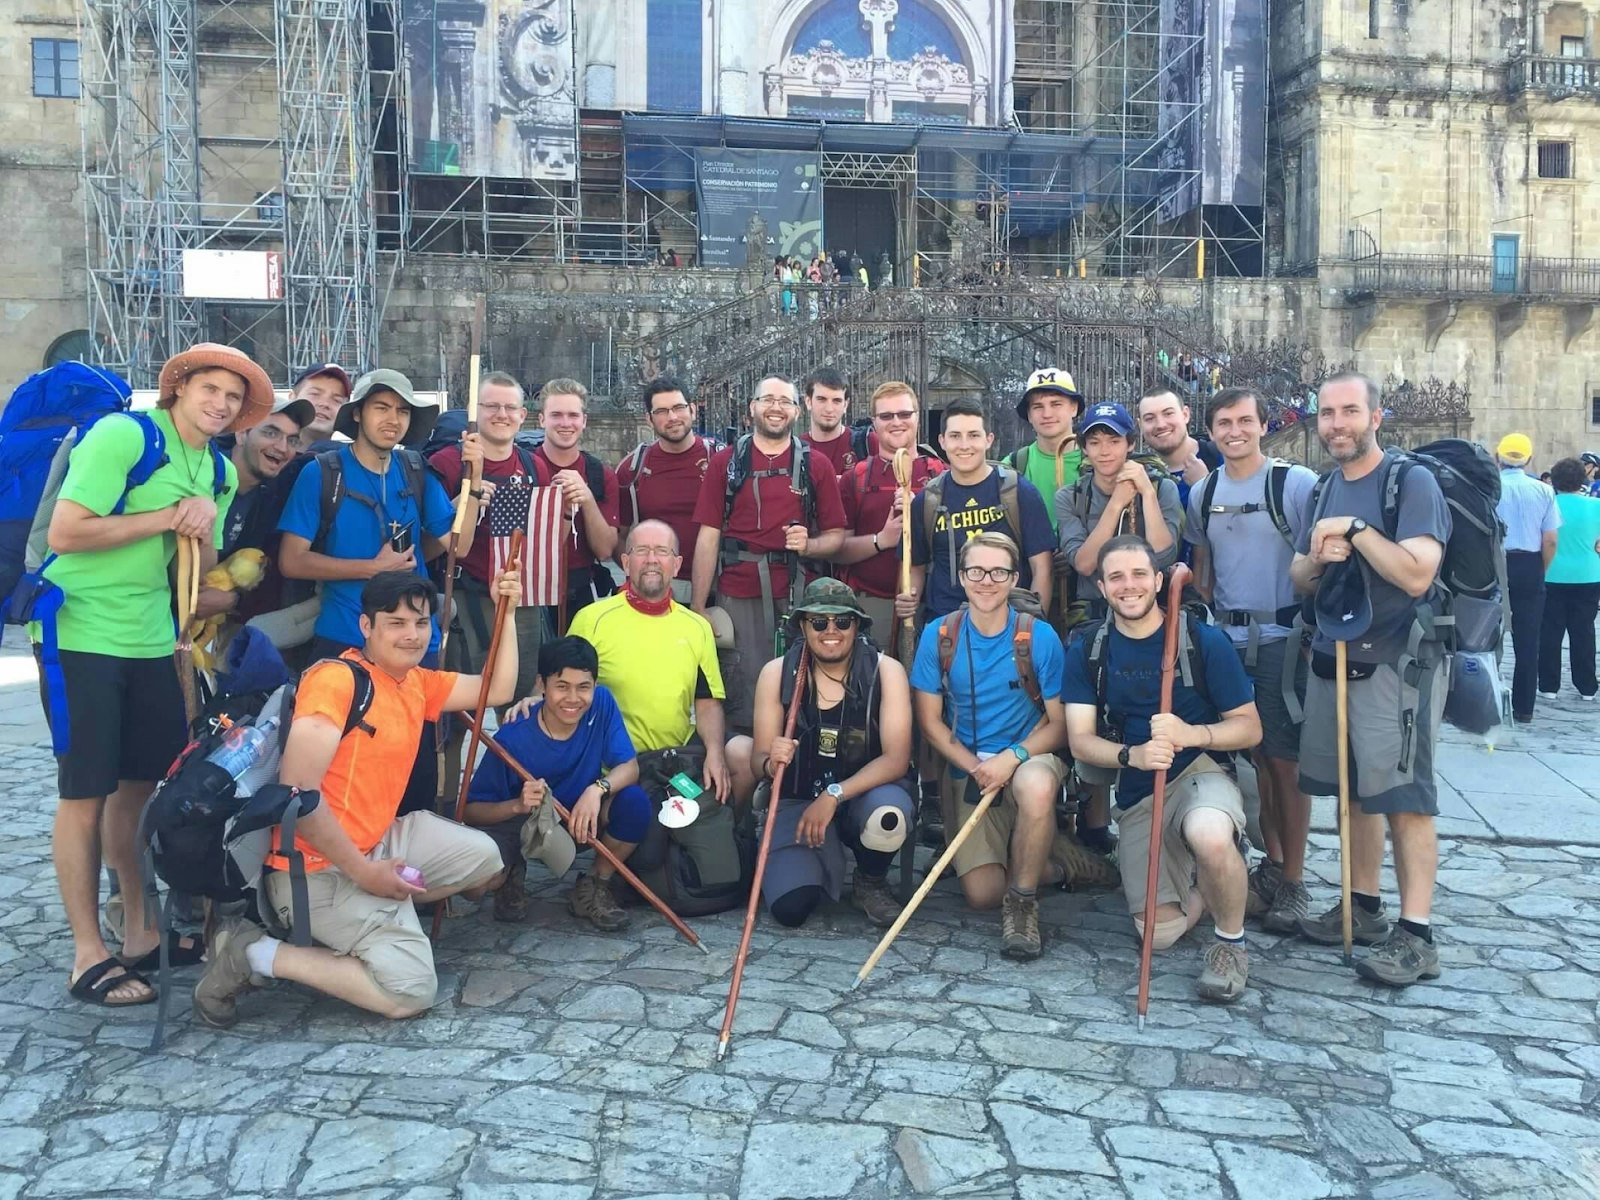 A group photo of the 2013 discernment retreat Fr. Birney led, posing before the Cathedral of Santiago de Compostela Basilica in Santiago, Spain, at the end of the Camino de Santiago. Fr. Birney said the group was noted among fellow travelers for having a consistent prayer schedule and came to be affectionately known as "Detroit." (Photo courtesy of Fr. Tim Birney)